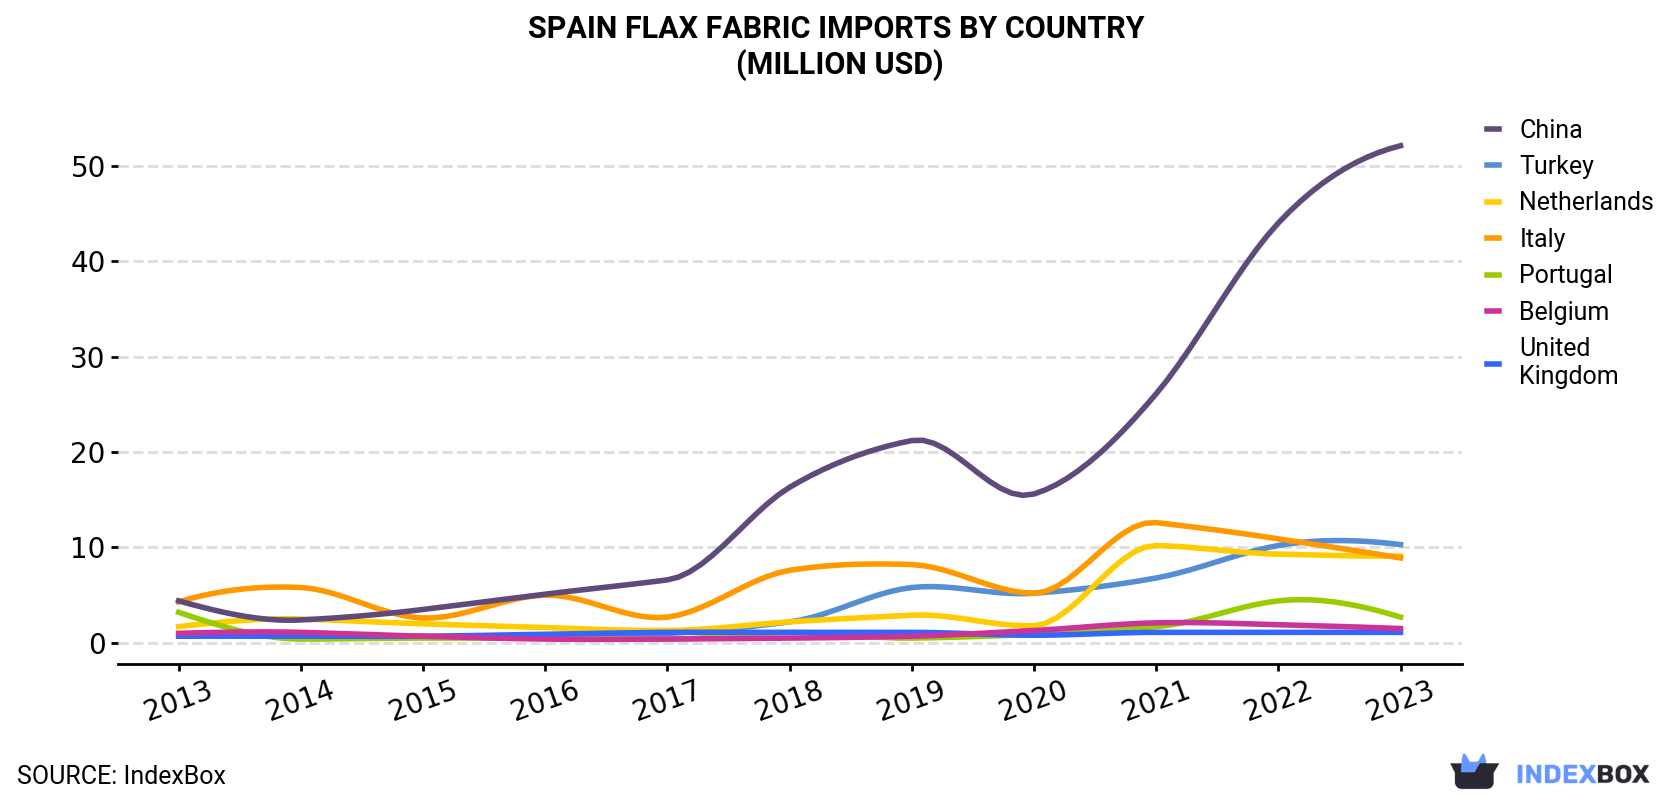 Spain Flax Fabric Imports By Country (Million USD)